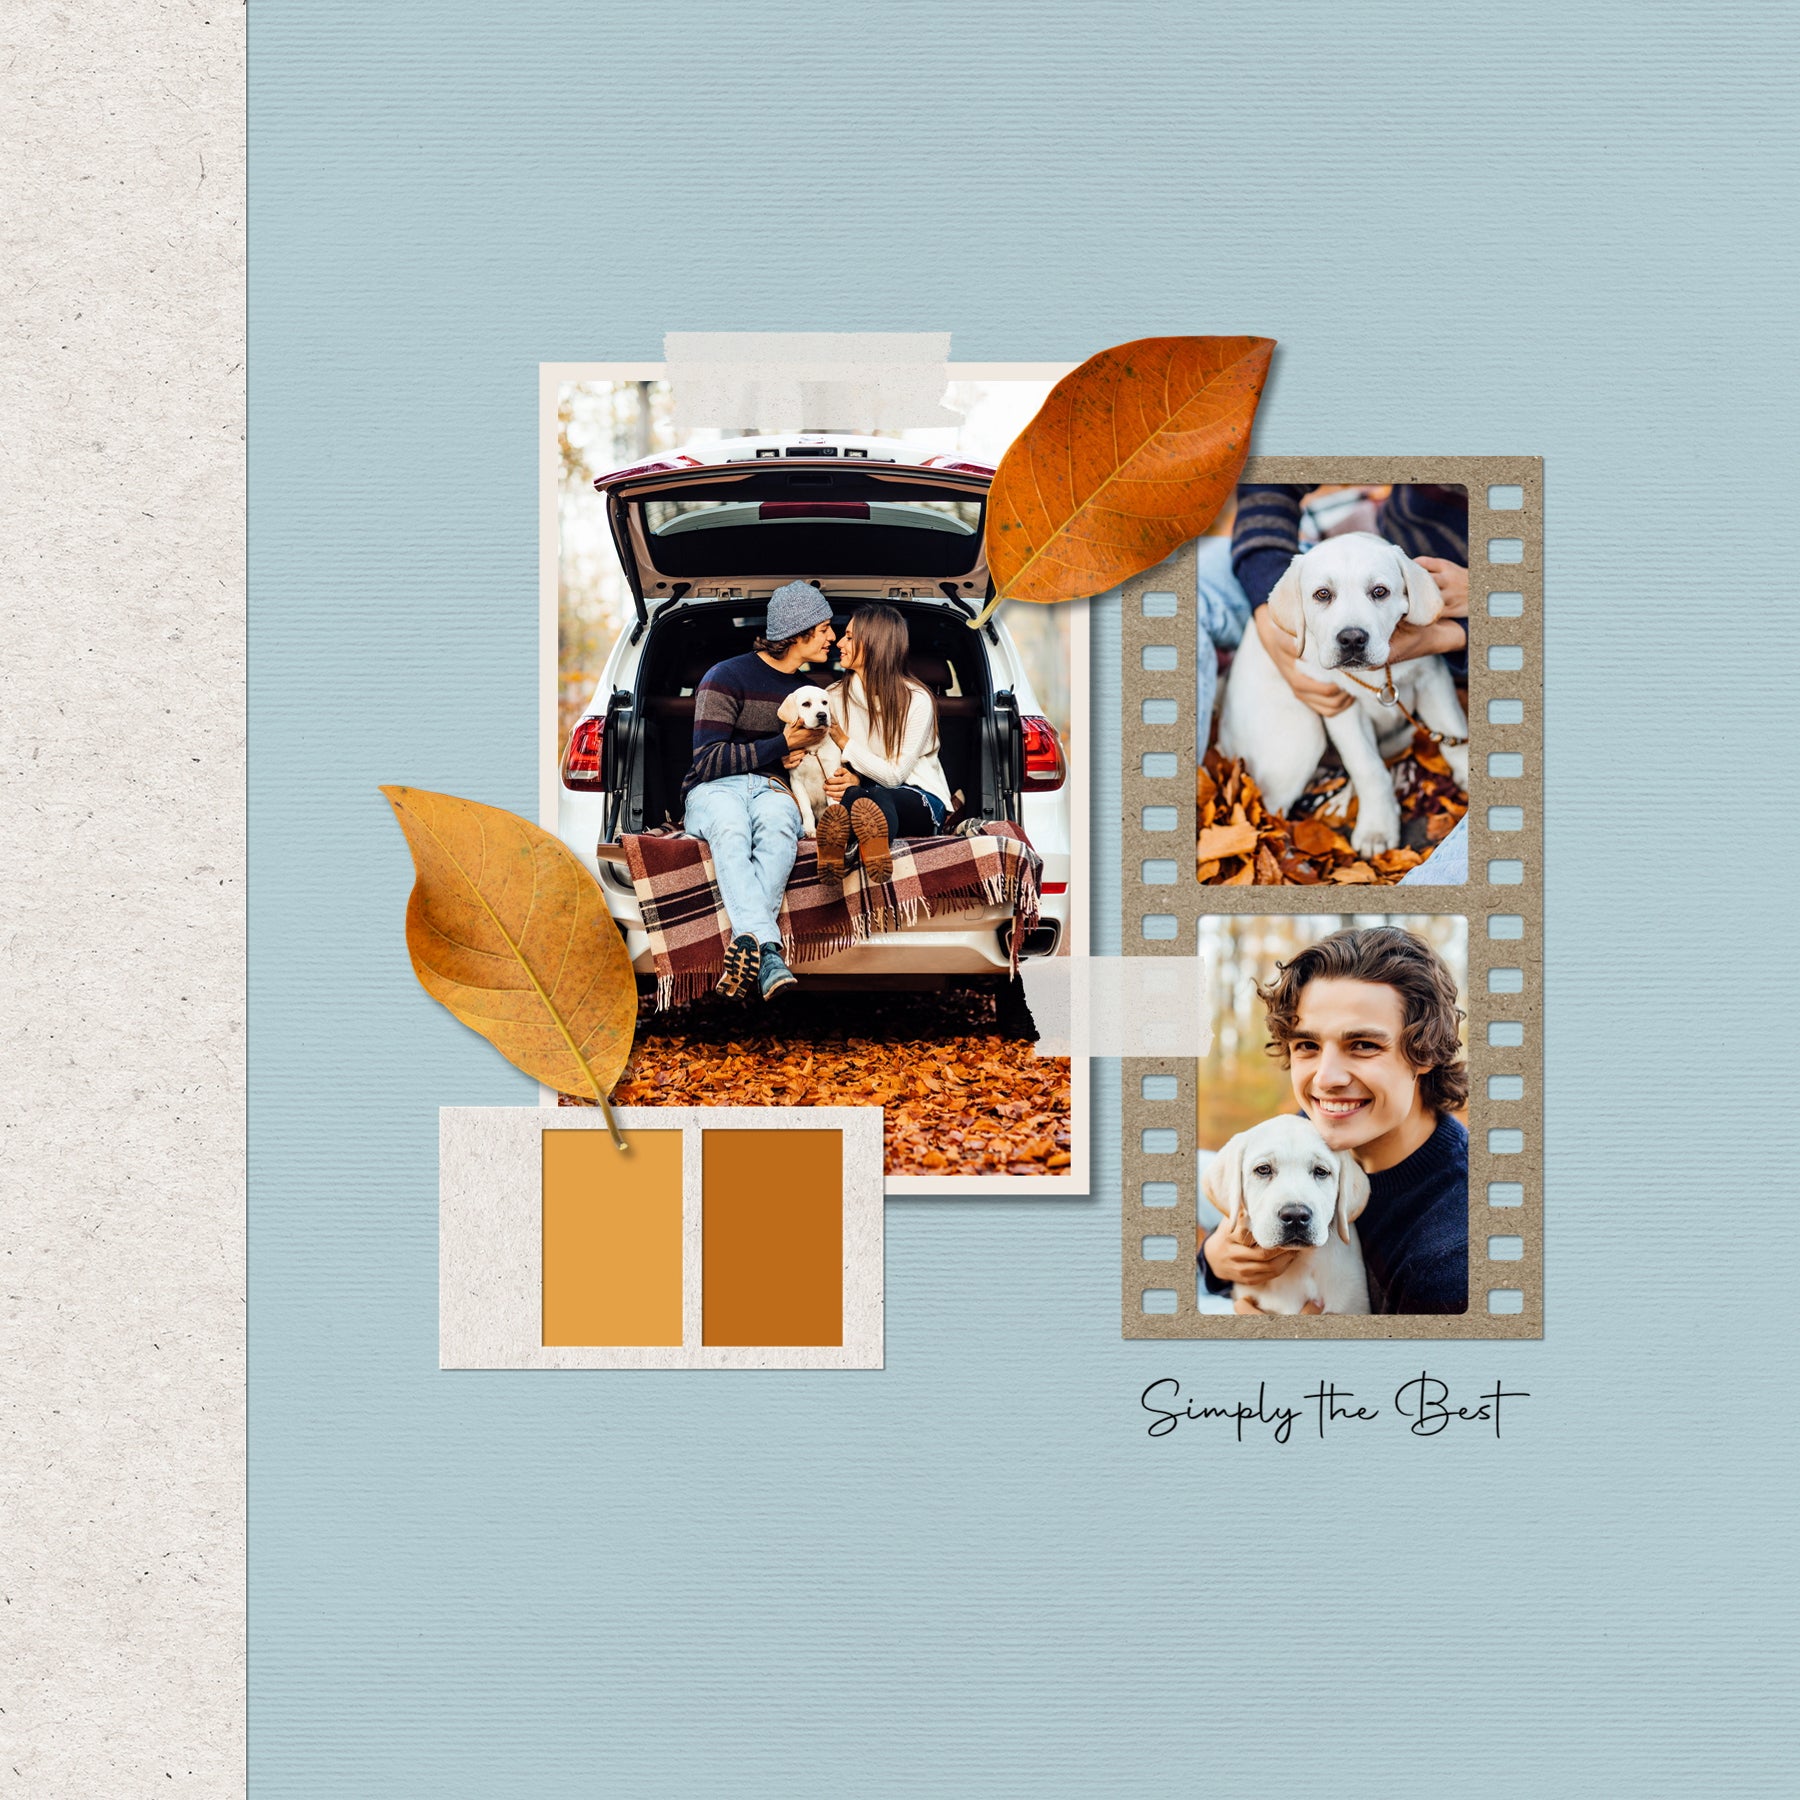 Designed with late summer, fall, and autumn in mind, these beautiful embellishments by Lucky Girl Creative digital art highlight a color palette which is completely customizable and meant to accent your photos no matter the theme or occasion. Versatile enough for everyday, the bits of nature are designed to accent your favorite photos and allow your creativity to soar.